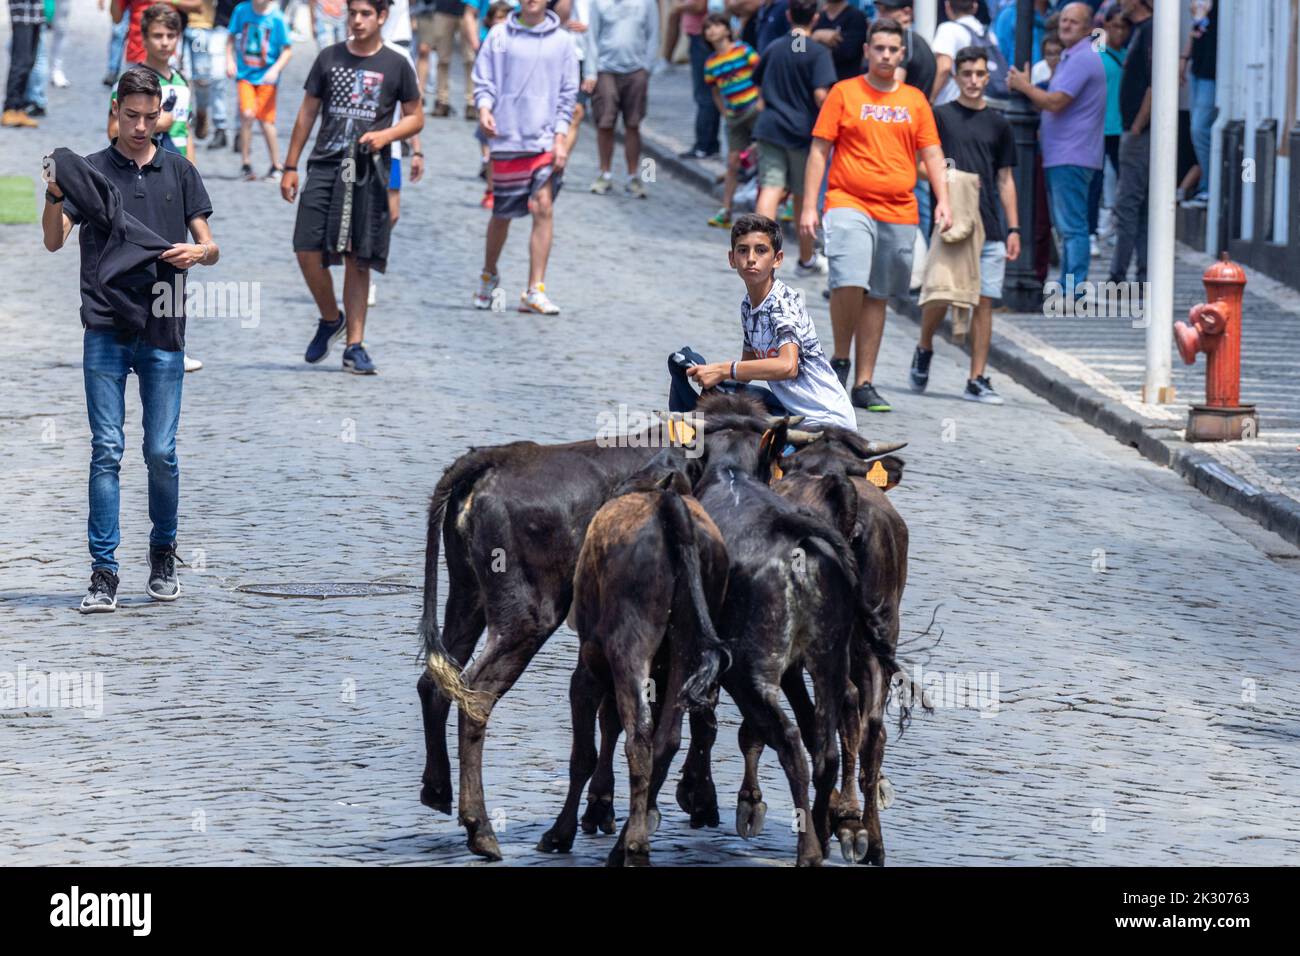 Young bulls prepares to charge a capinha or amateur bullfighter during a tourada a corda, also called a bull-on-a-rope at the Sanjoaninas festival on Rue de Sao Joao in Angra do Heroísmo, Terceira Island, Azores, Portugal. During the uniquely Azorean event a bull tied to a long rope runs loose as participants attempt to distract or run from the bull. Stock Photo